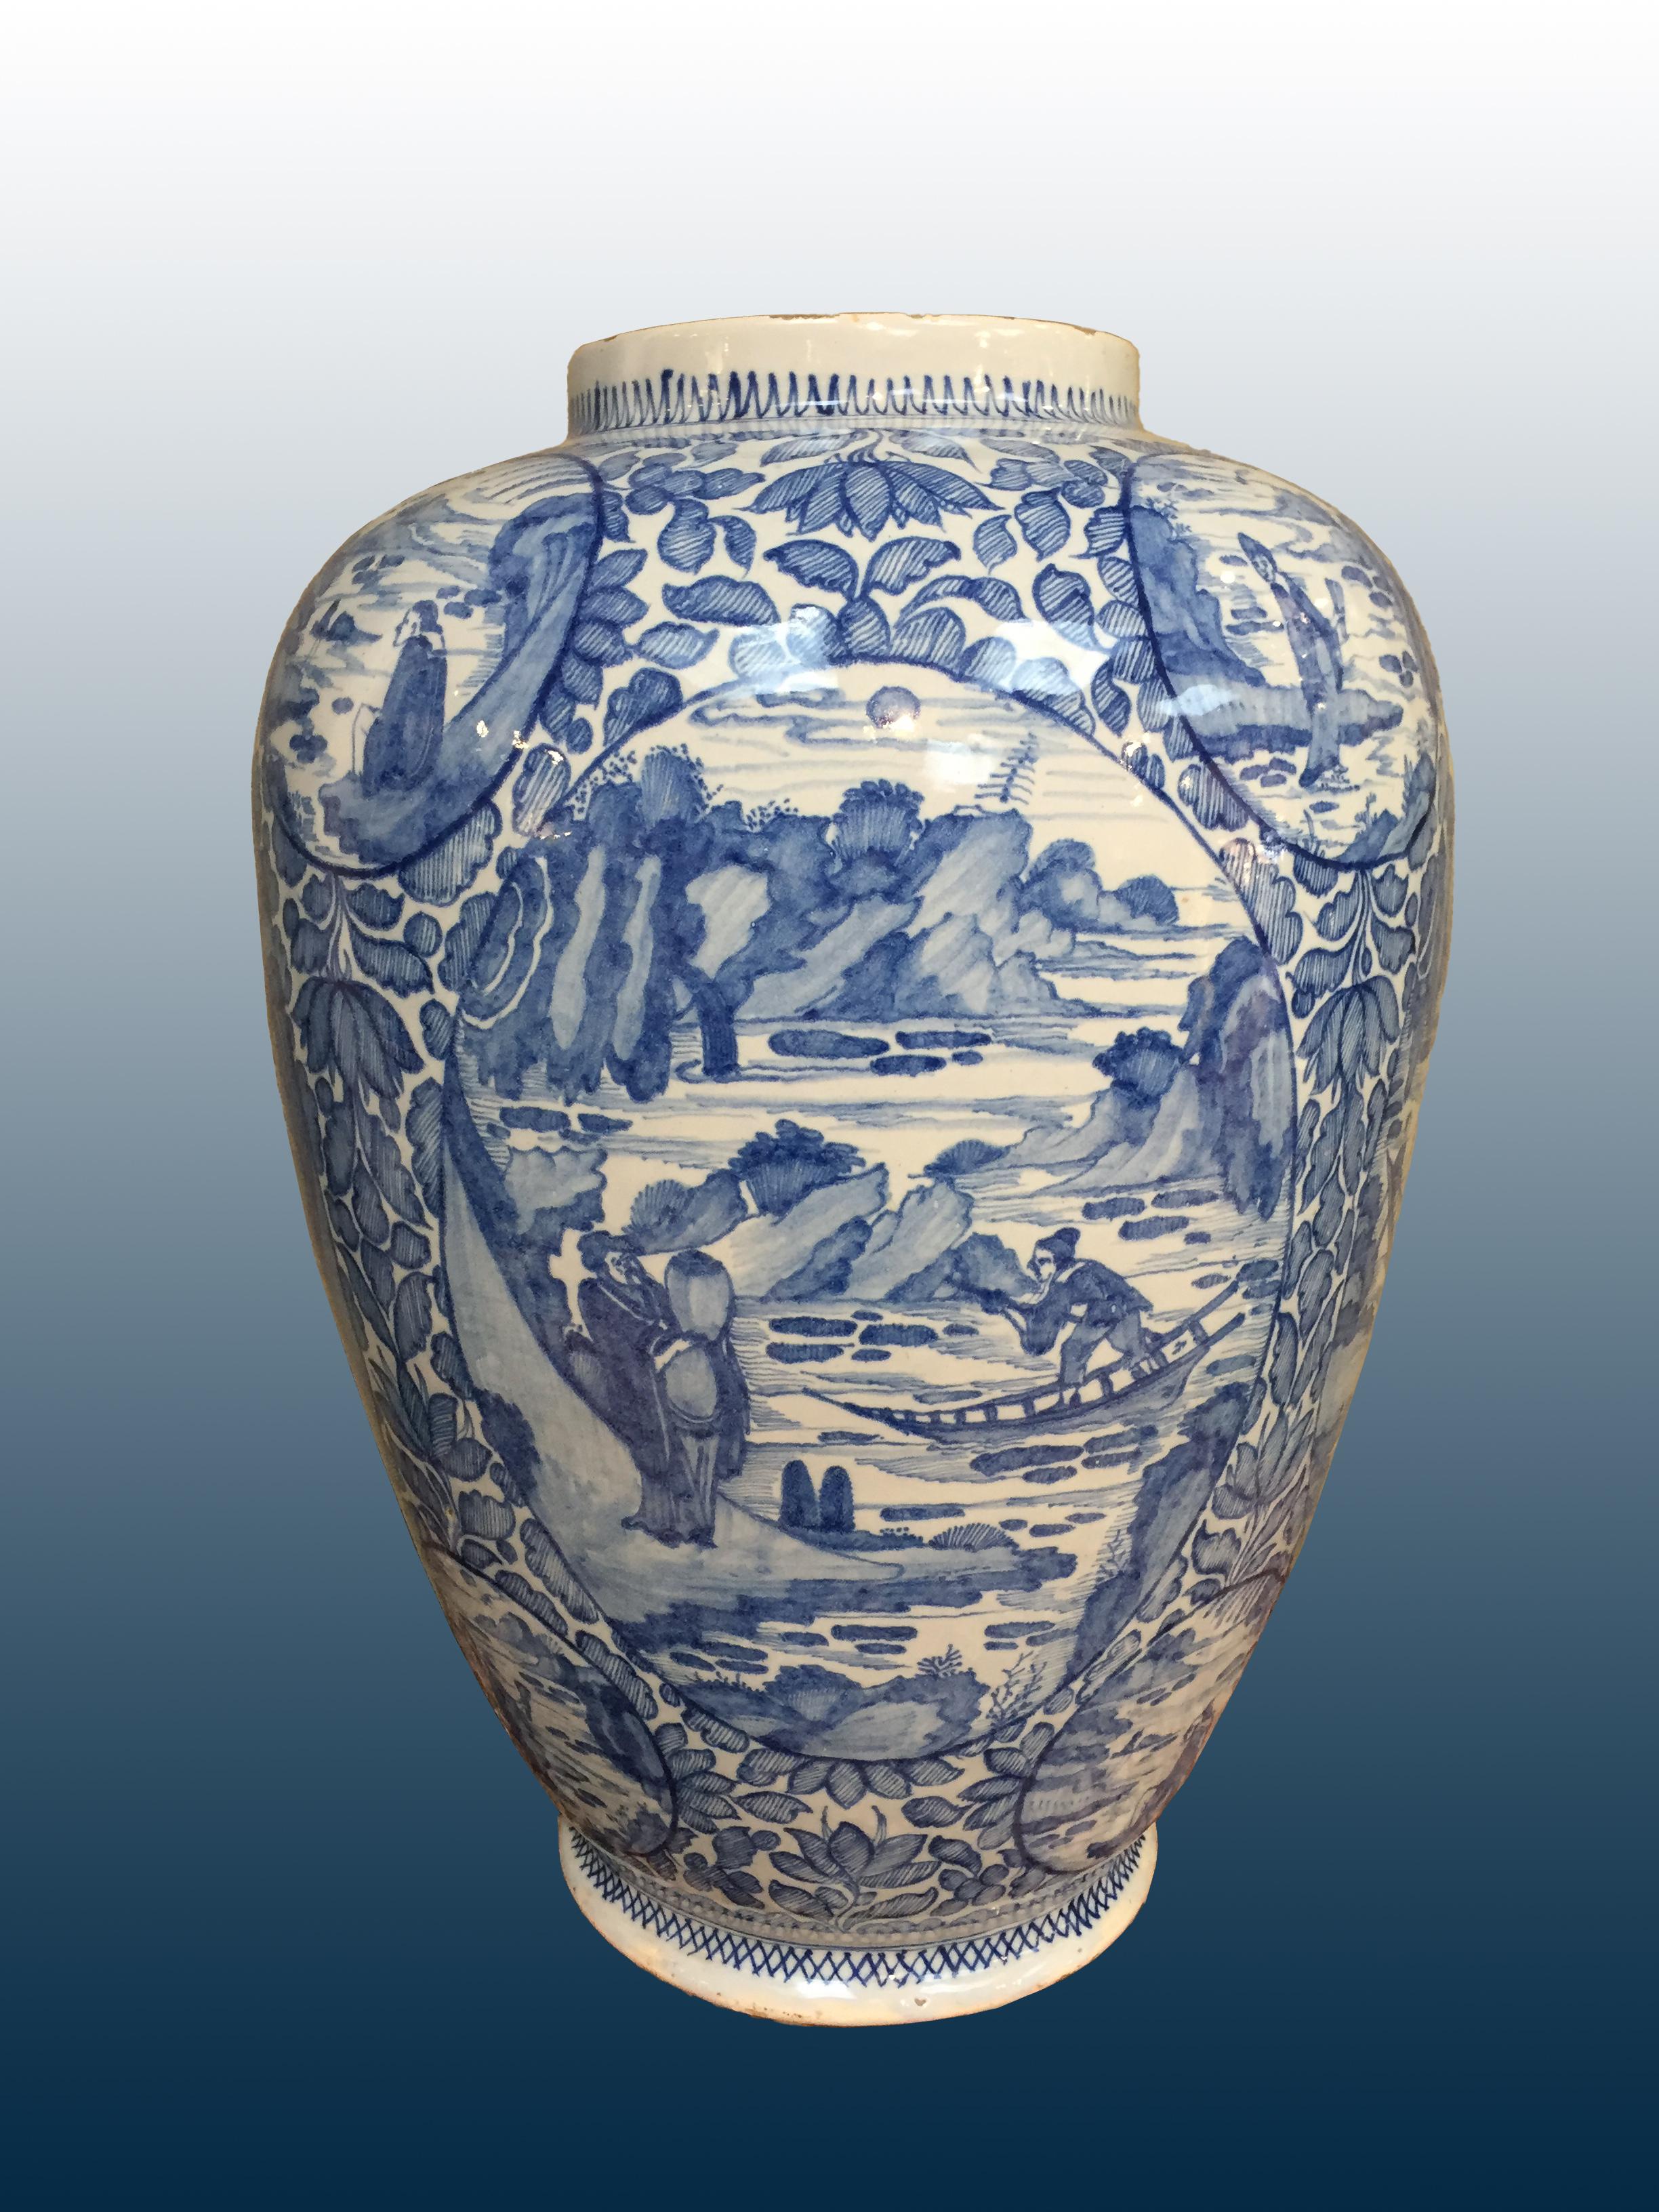 Very Large Blue and White Dutch Delft Vase in Chinoiserie, Early 18th Century For Sale 1